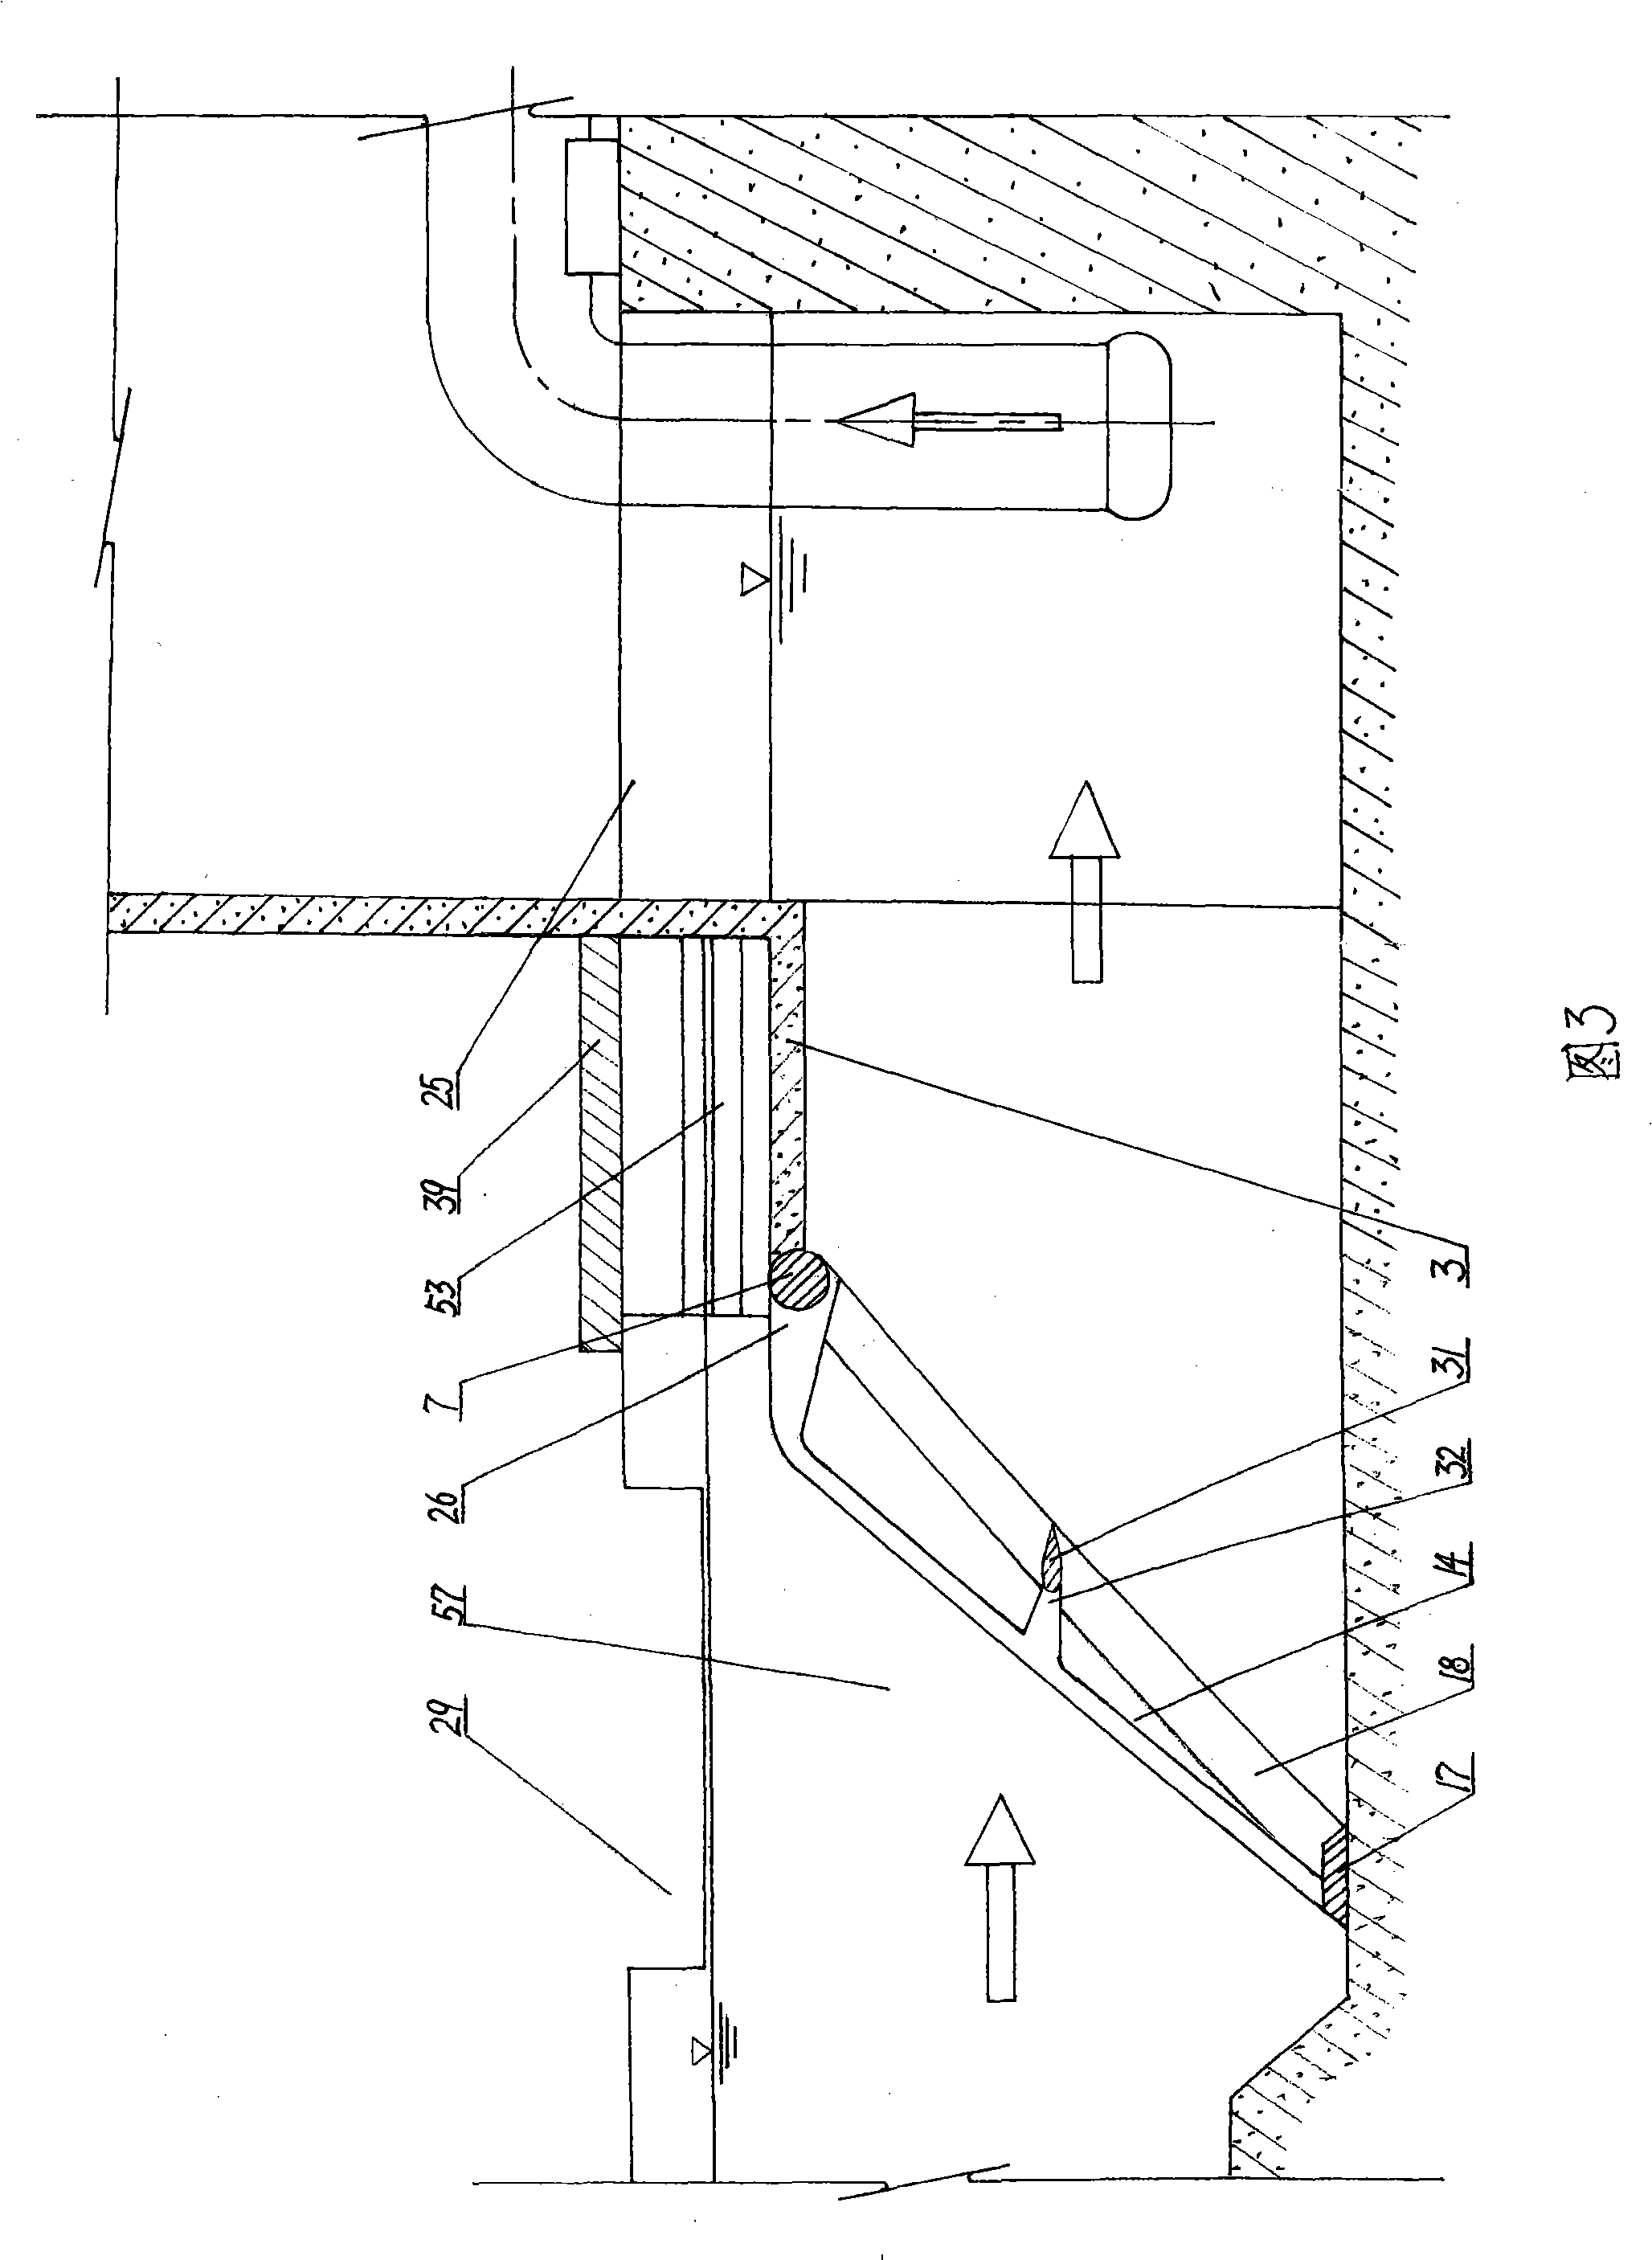 Full automatic pollution removing ice discharge apparatus